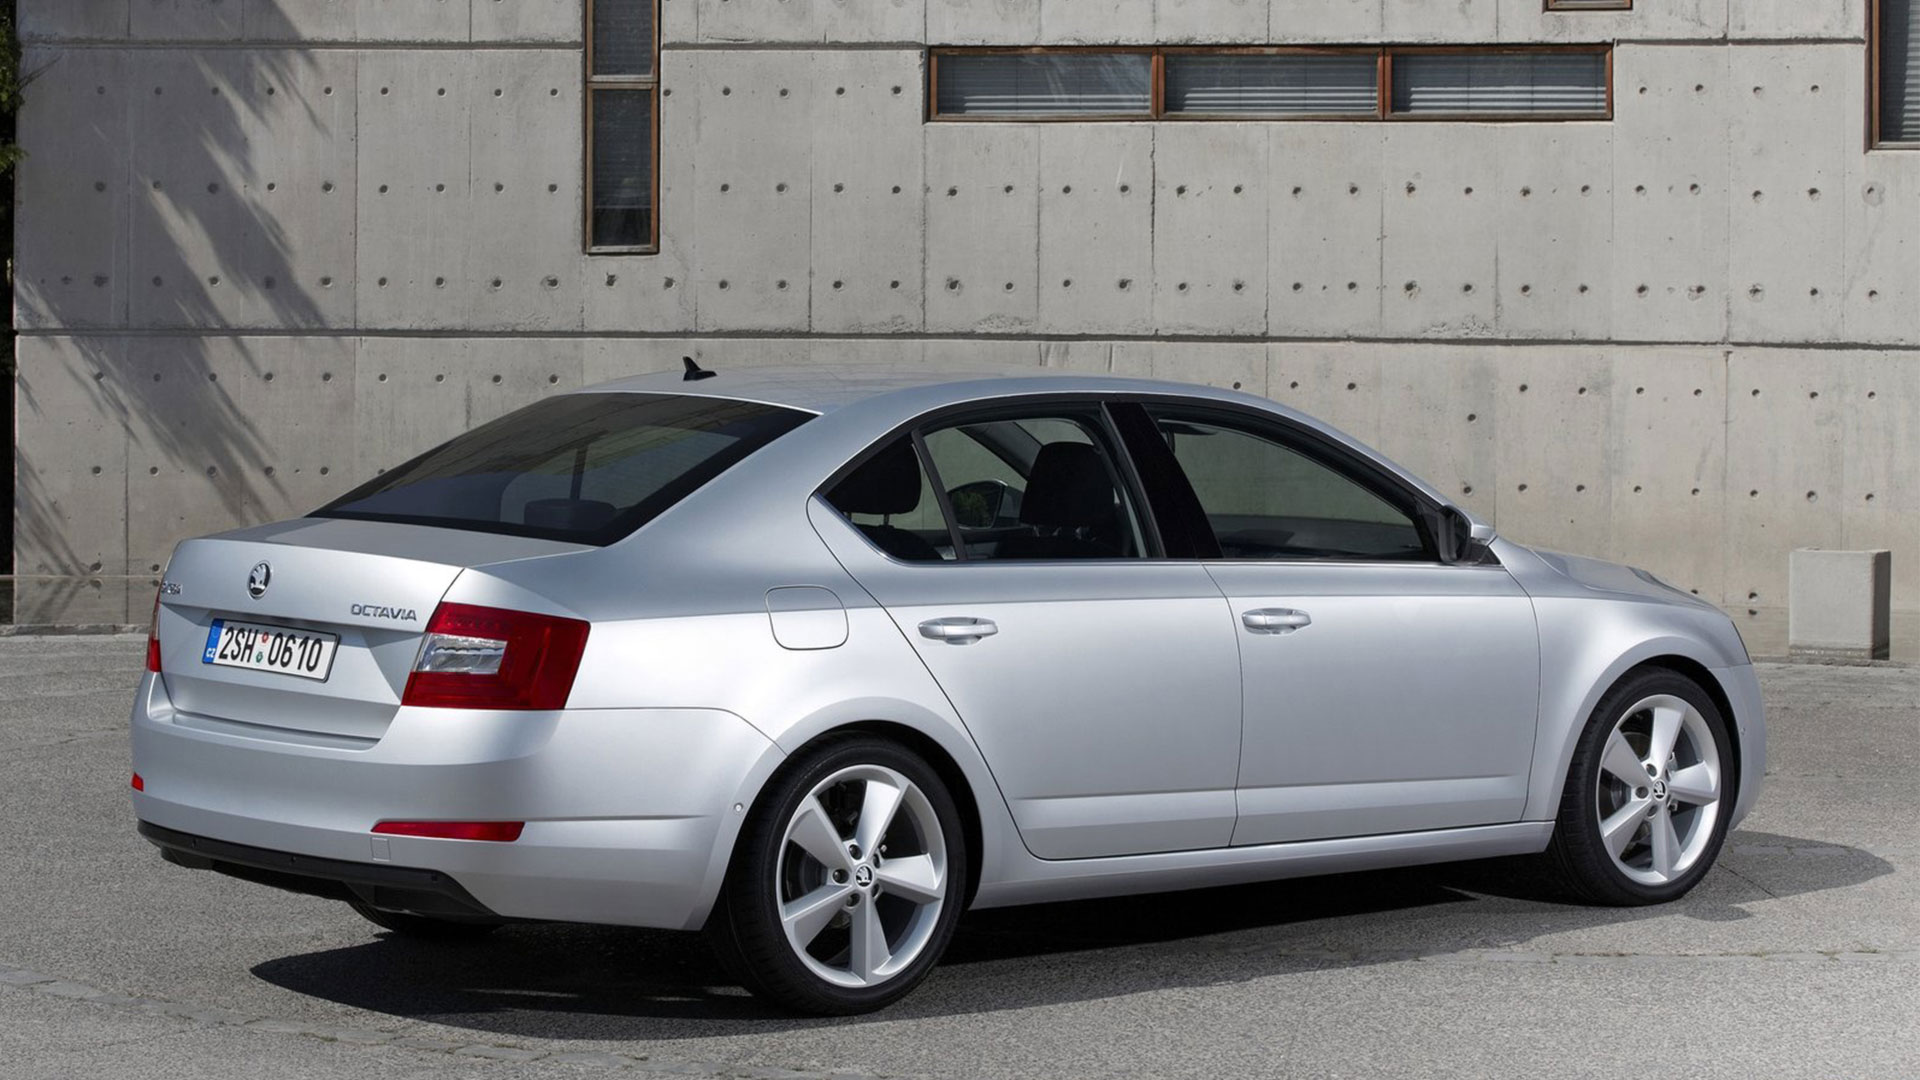 Click Here To Download In Hd Format > > Skoda Octavia , HD Wallpaper & Backgrounds